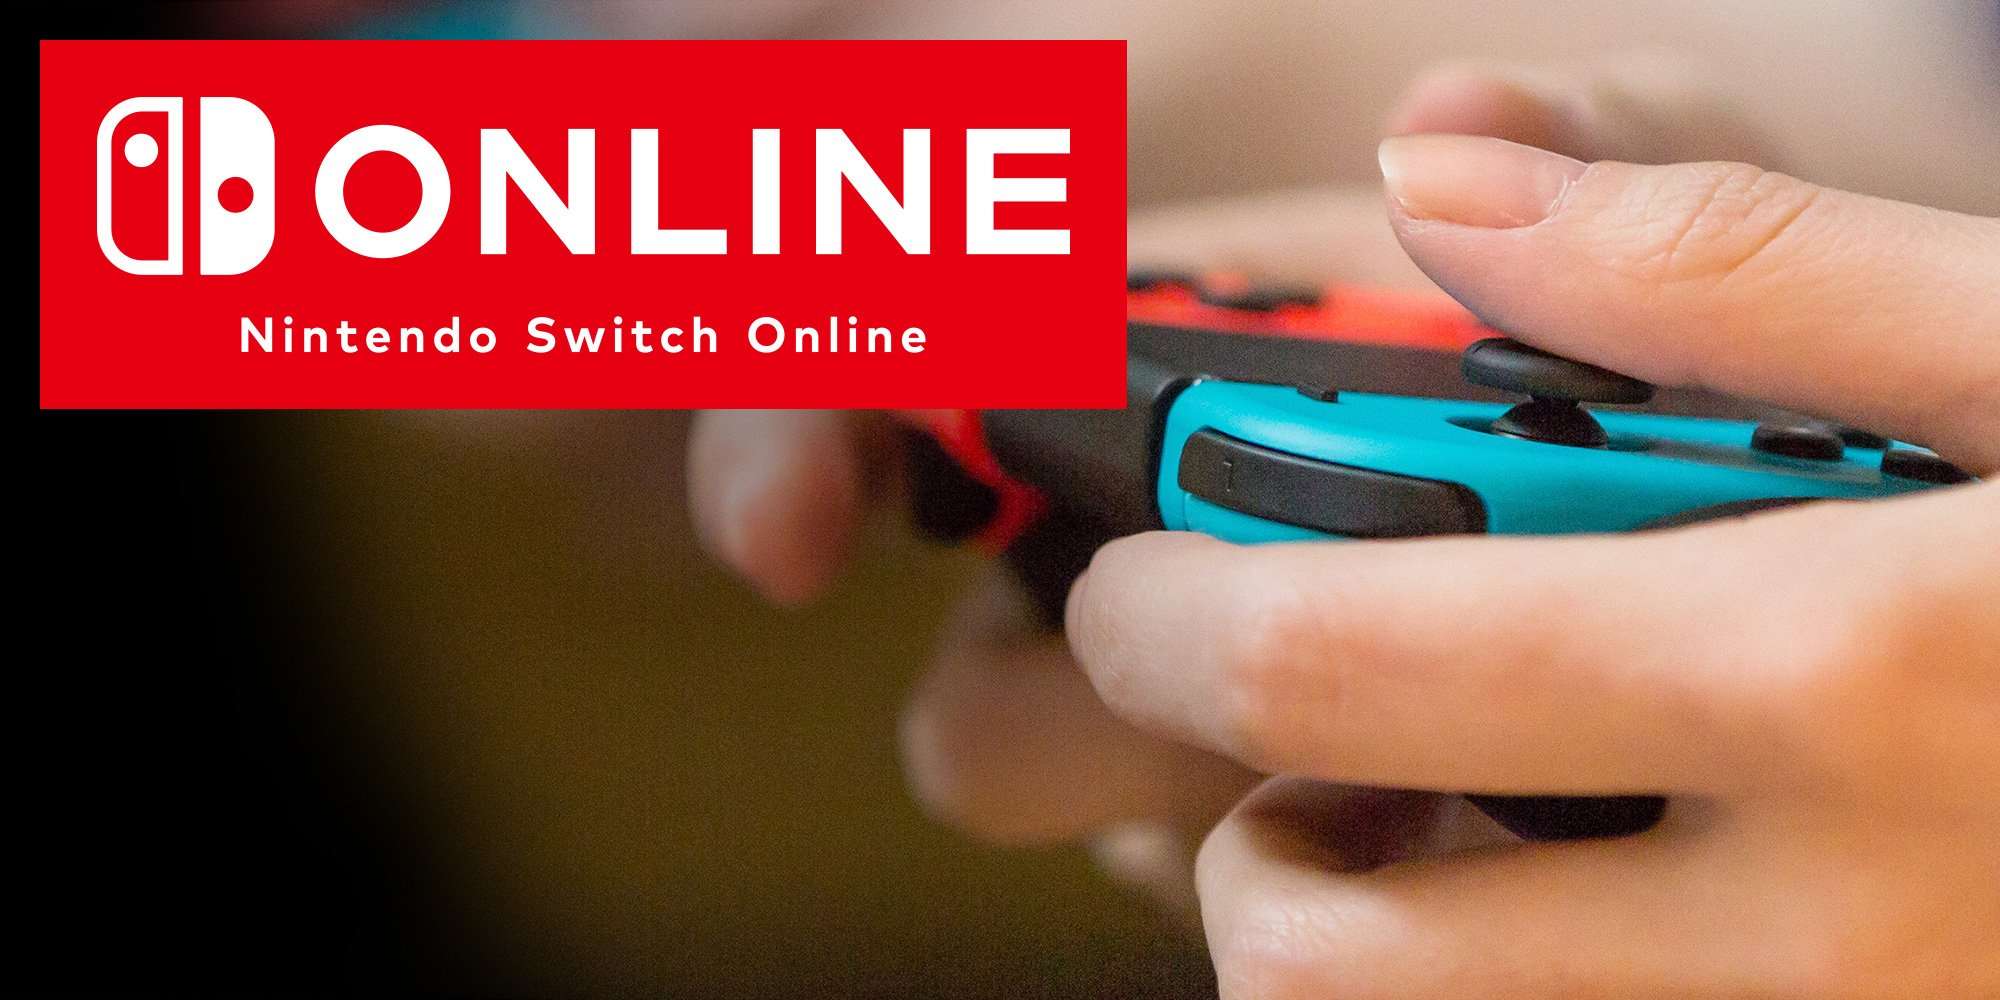 image for Paid Nintendo Switch Online Service Delayed To Fall 2018, According To Nintendo Italy